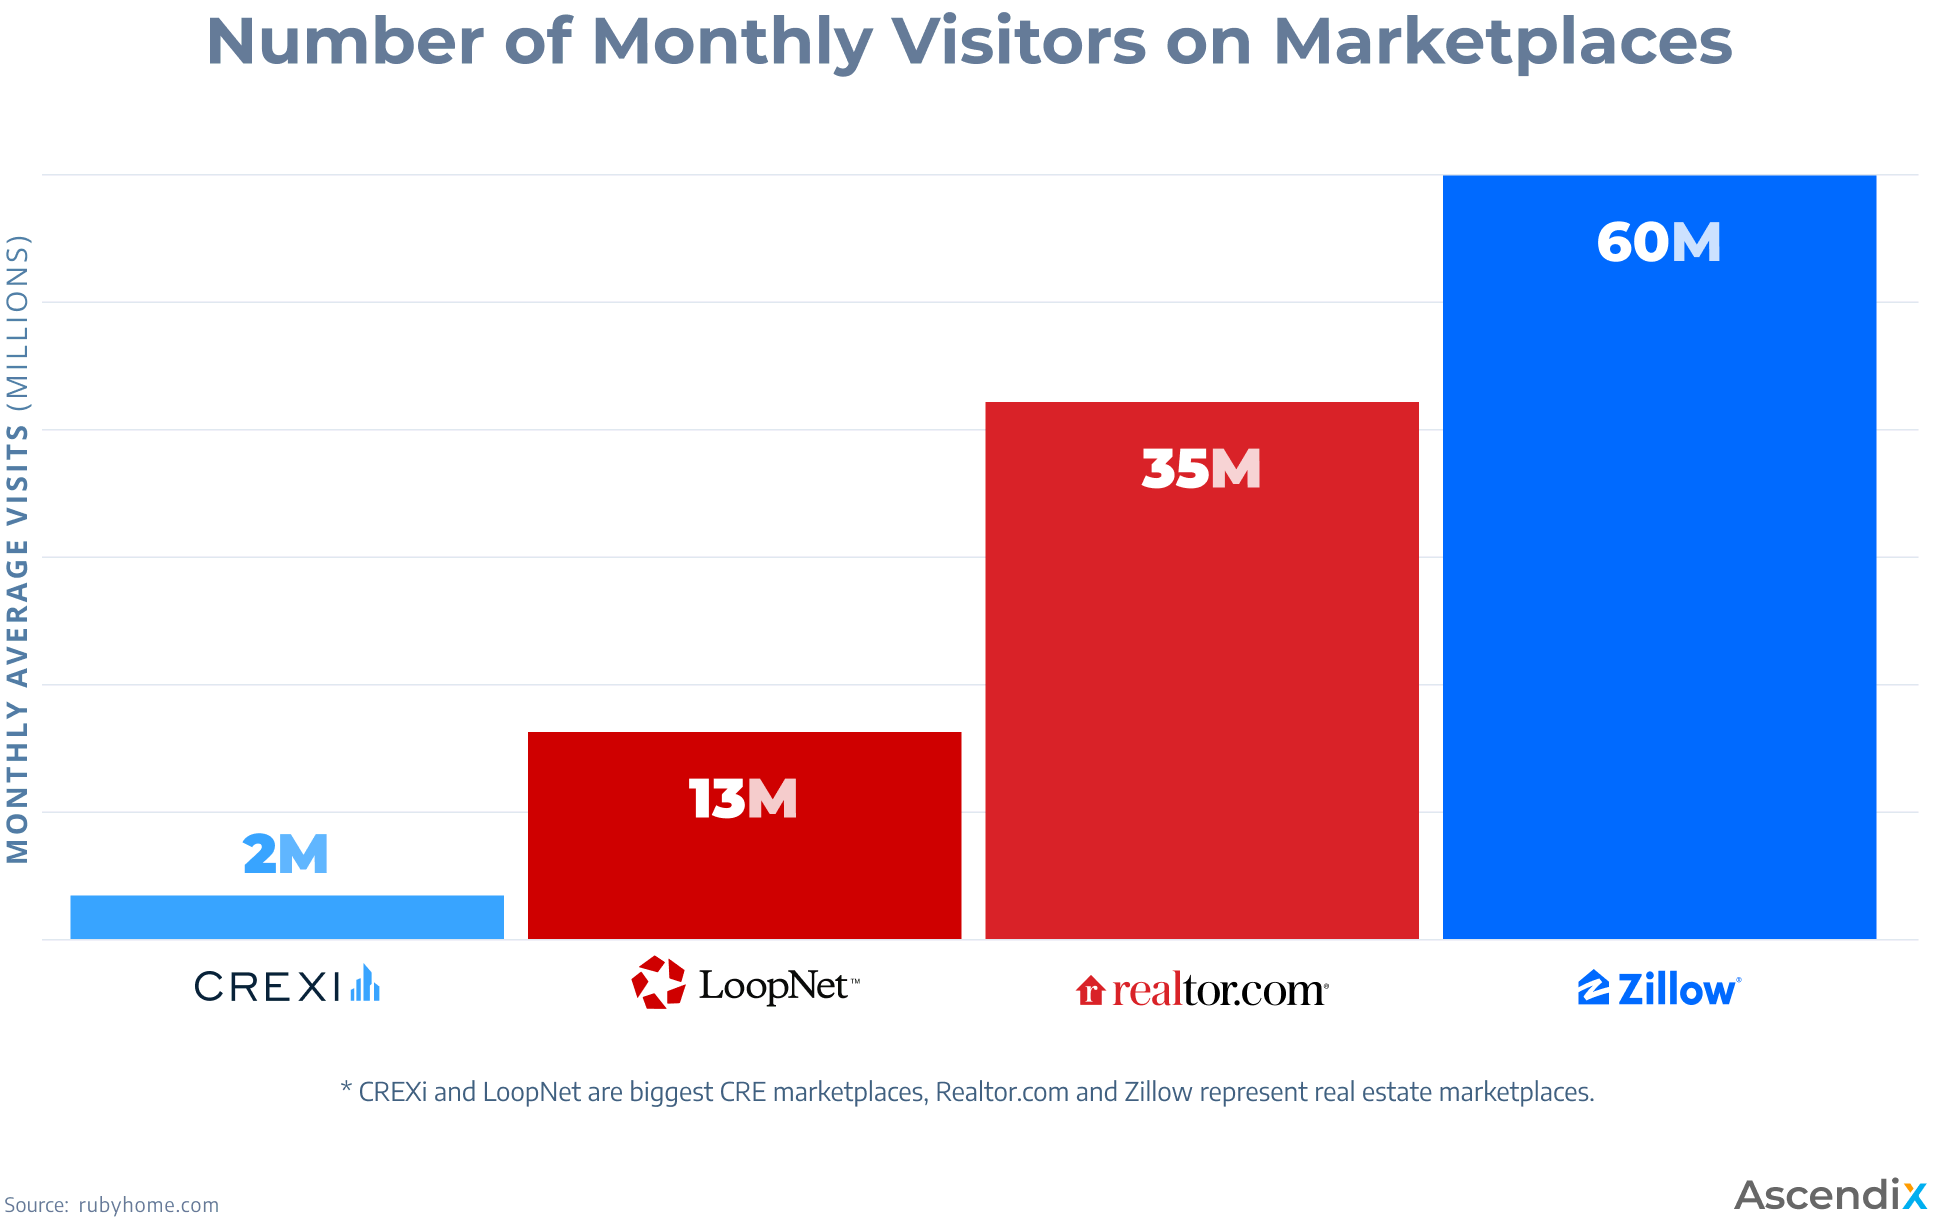 01_Number of Monthly Visitors on Marketplaces